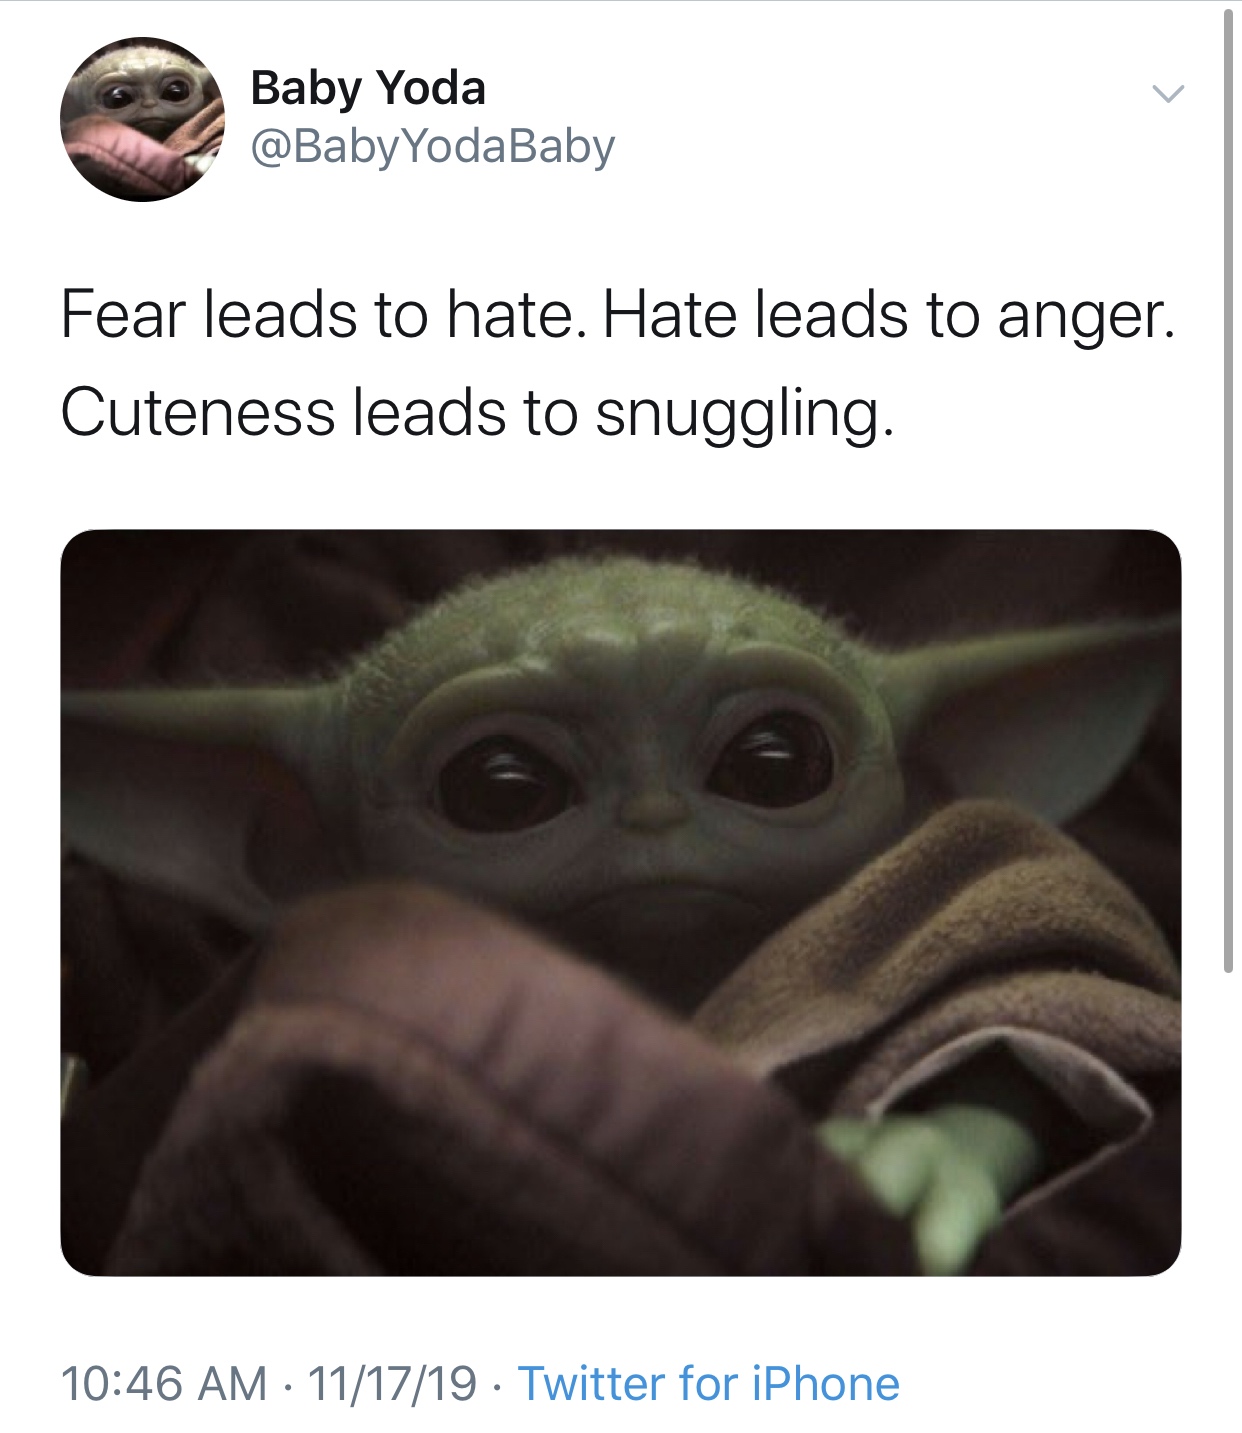 baby yoda meme - Baby Yoda Fear leads to hate. Hate leads to anger. Cuteness leads to snuggling. 111719. Twitter for iPhone